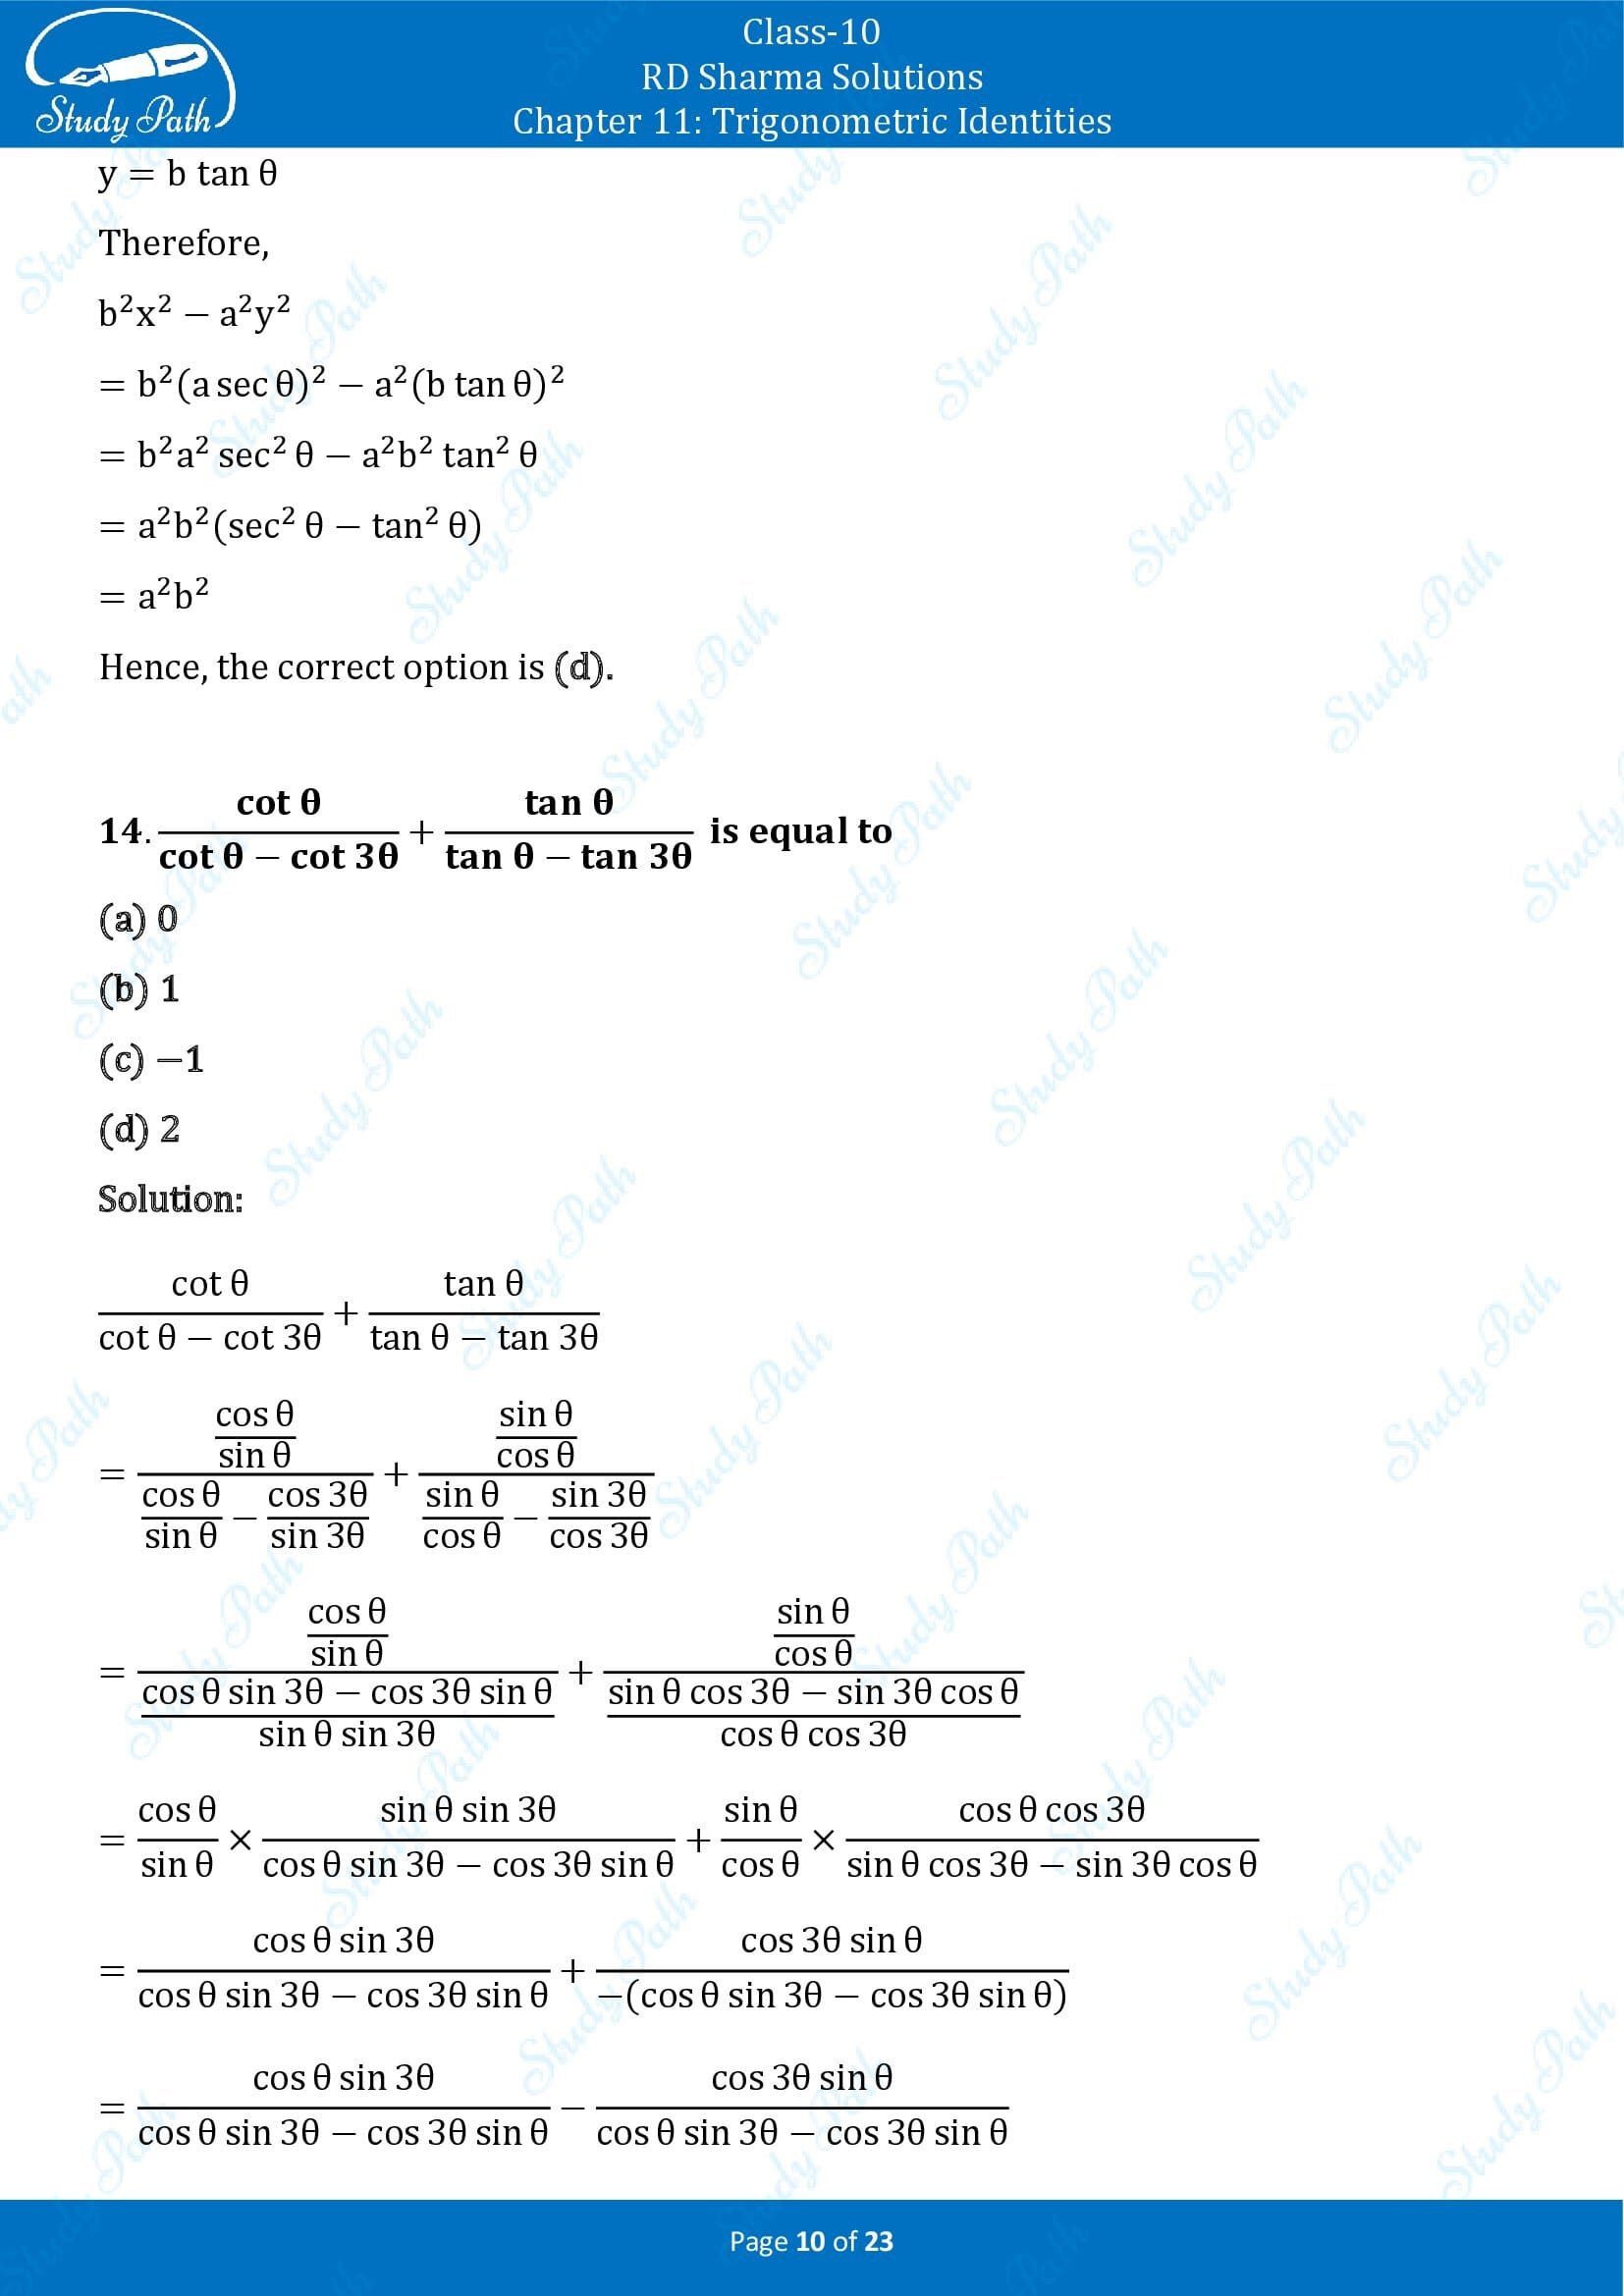 RD Sharma Solutions Class 10 Chapter 11 Trigonometric Identities Multiple Choice Questions MCQs 00010